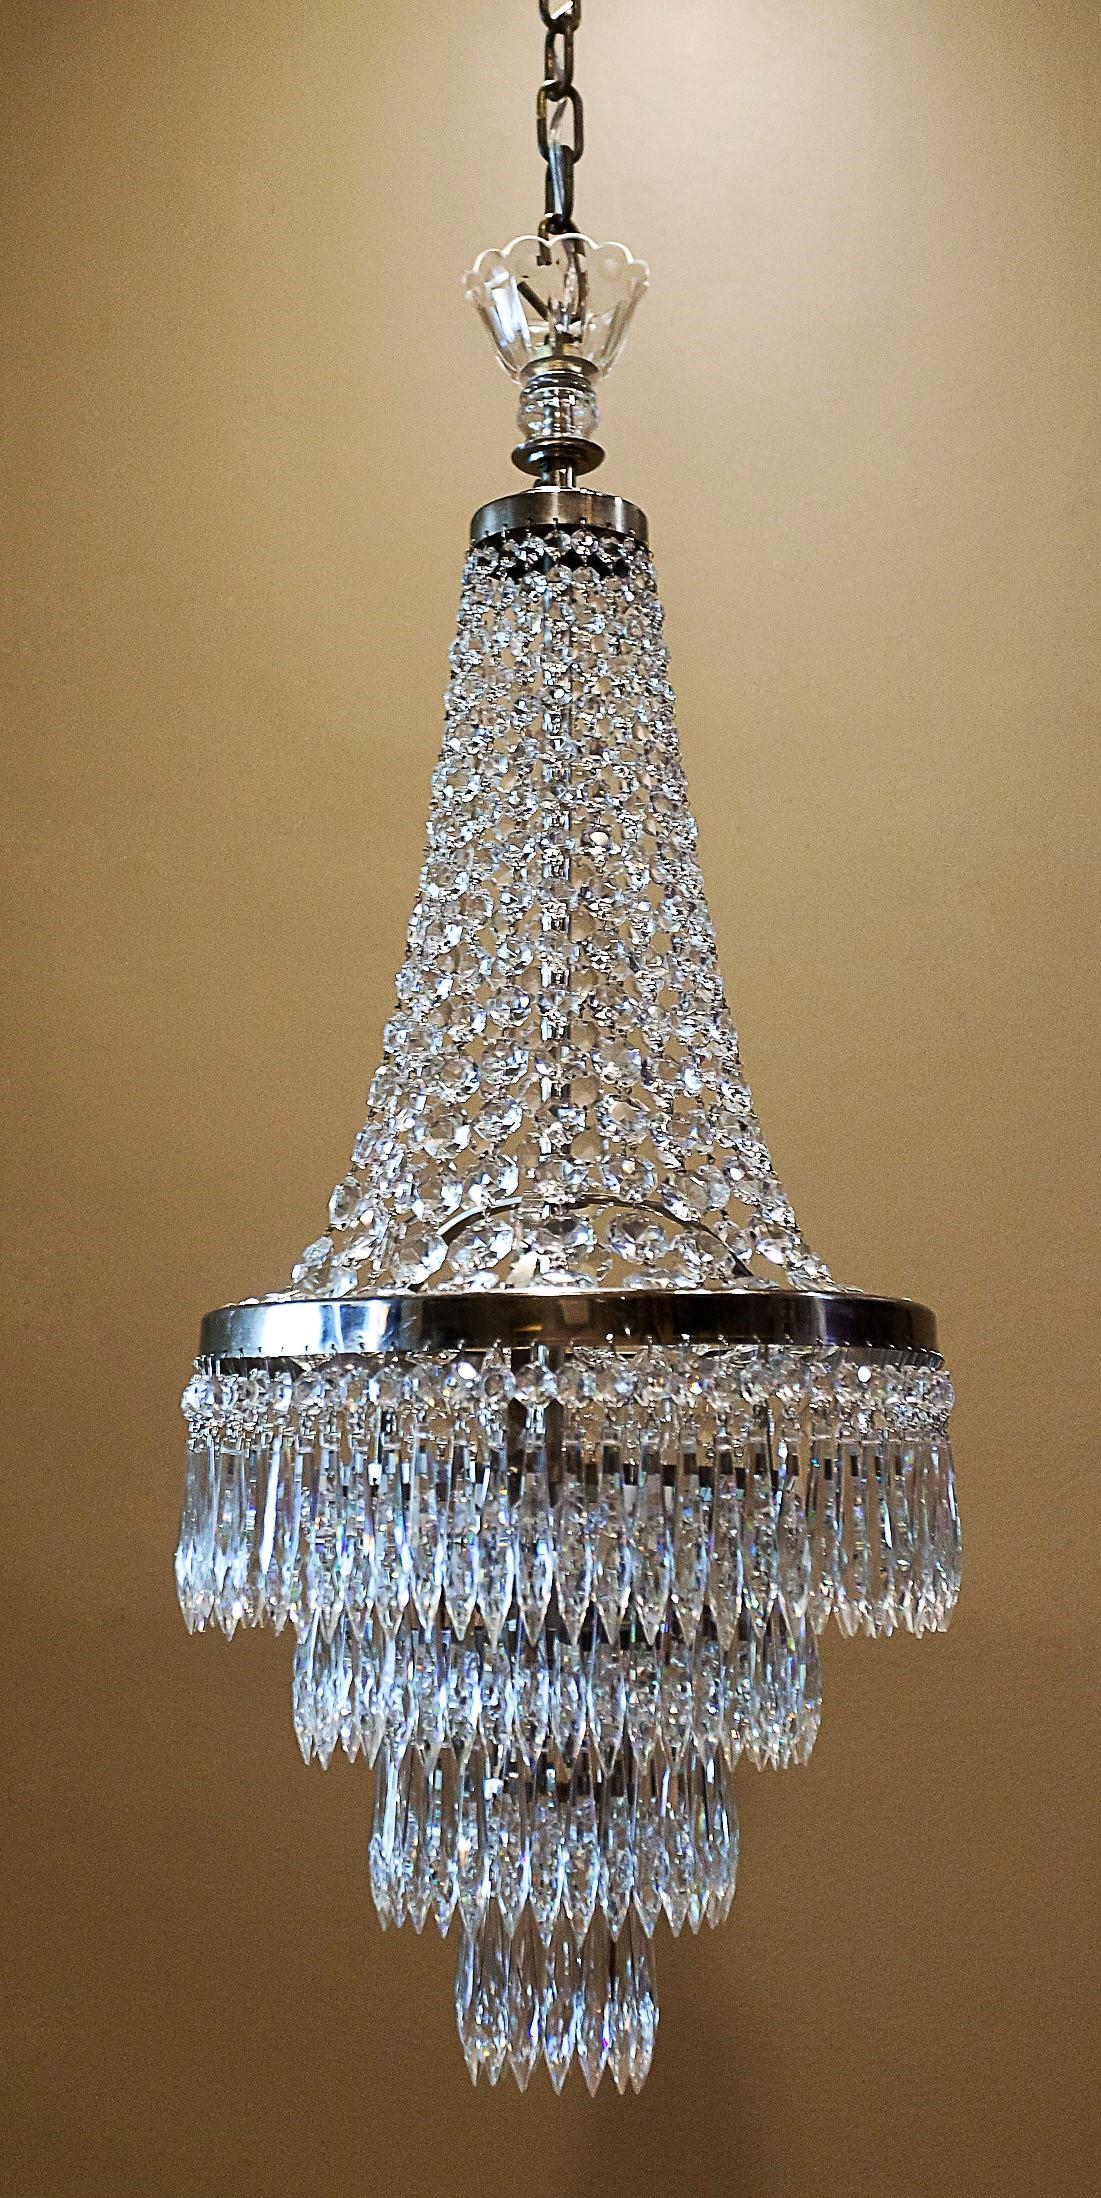 The metal frames and rings on these slender chandeliers are chrome-plated brass, with lead crystal icicle prisms attached. Each socket can take up to a 40-watt candelabra-base bulb. This style of fixture is sometimes called a 